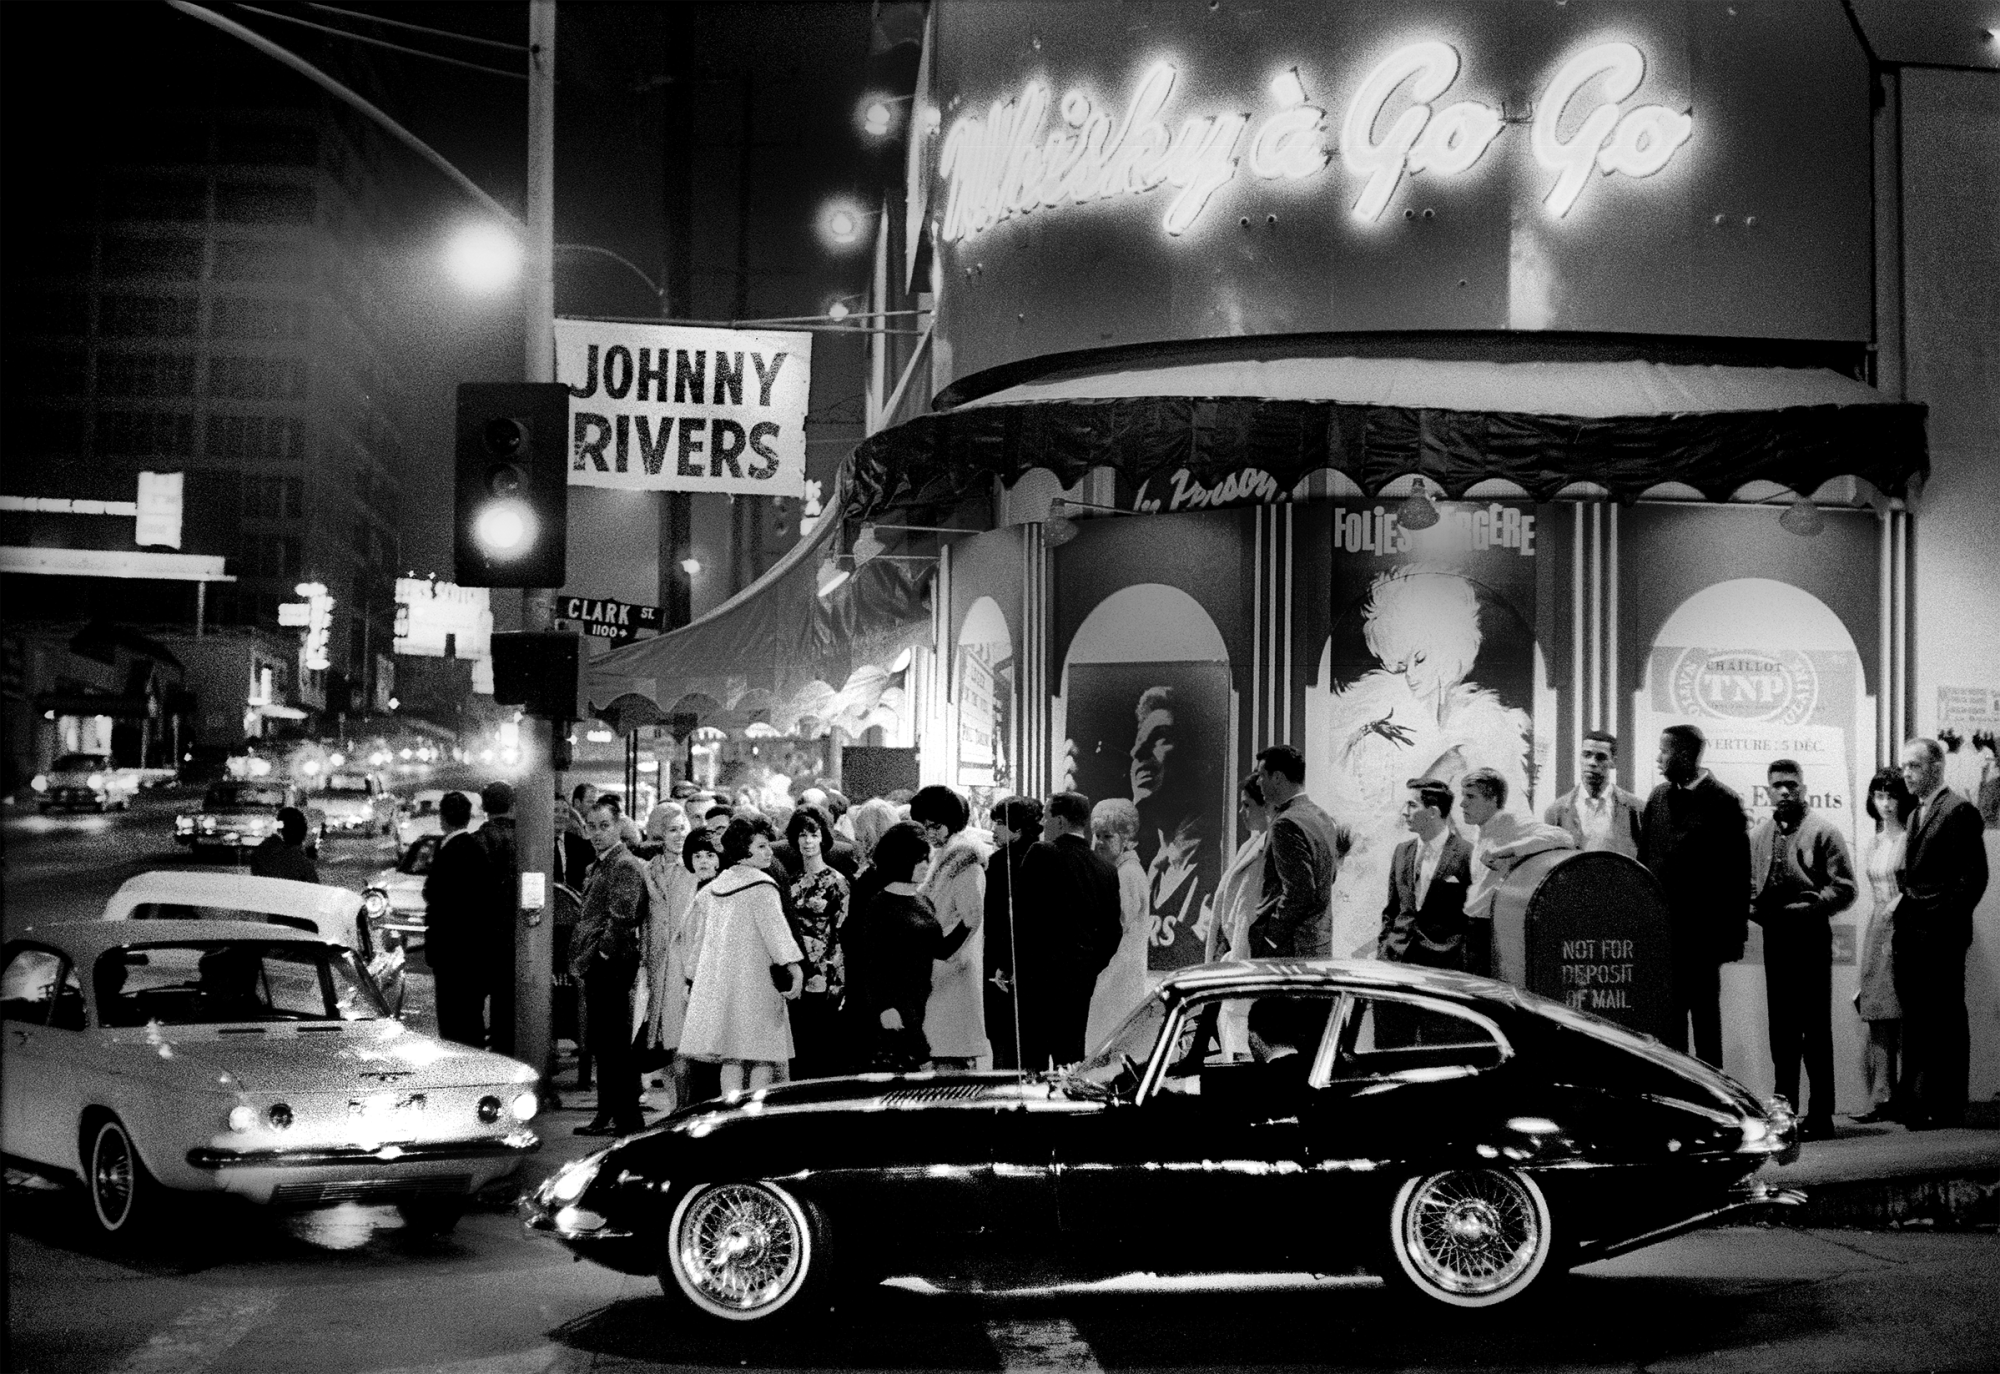 People form a line outside Whisky a Go-Go on the Sunset Strip in 1964